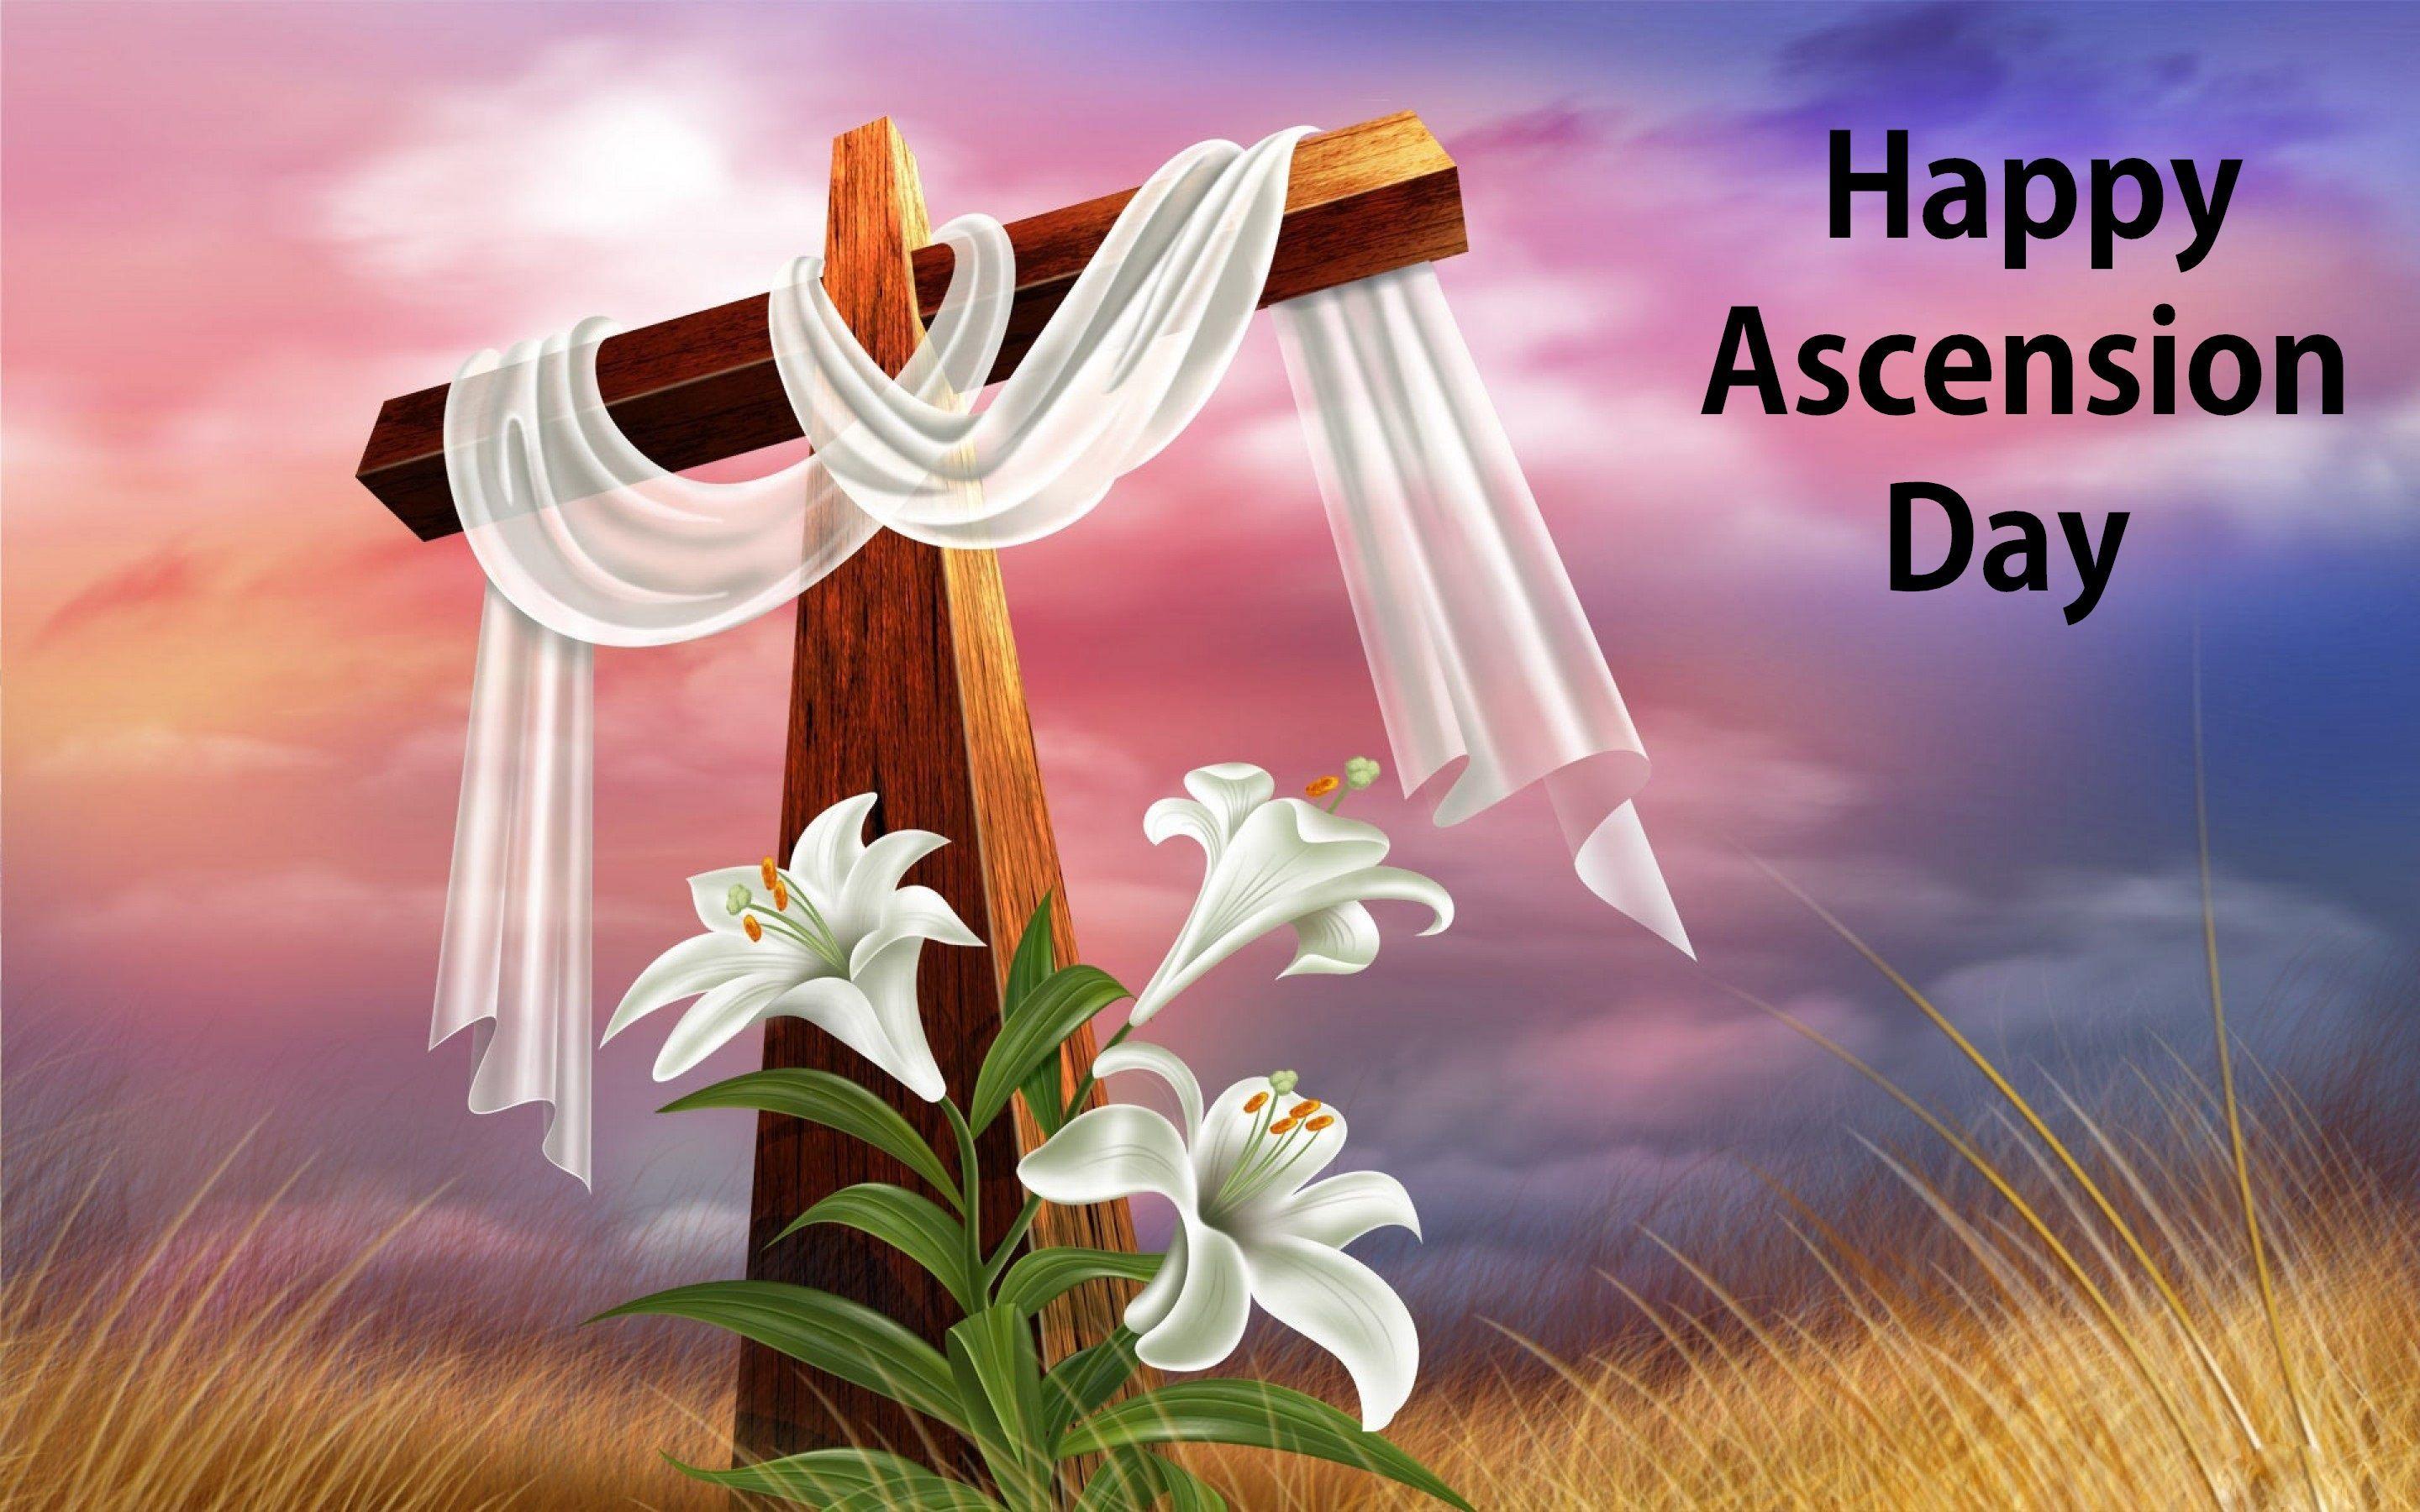 Happy Ascension Day 2017 HD Wallpaper, Picture, Image, Photo